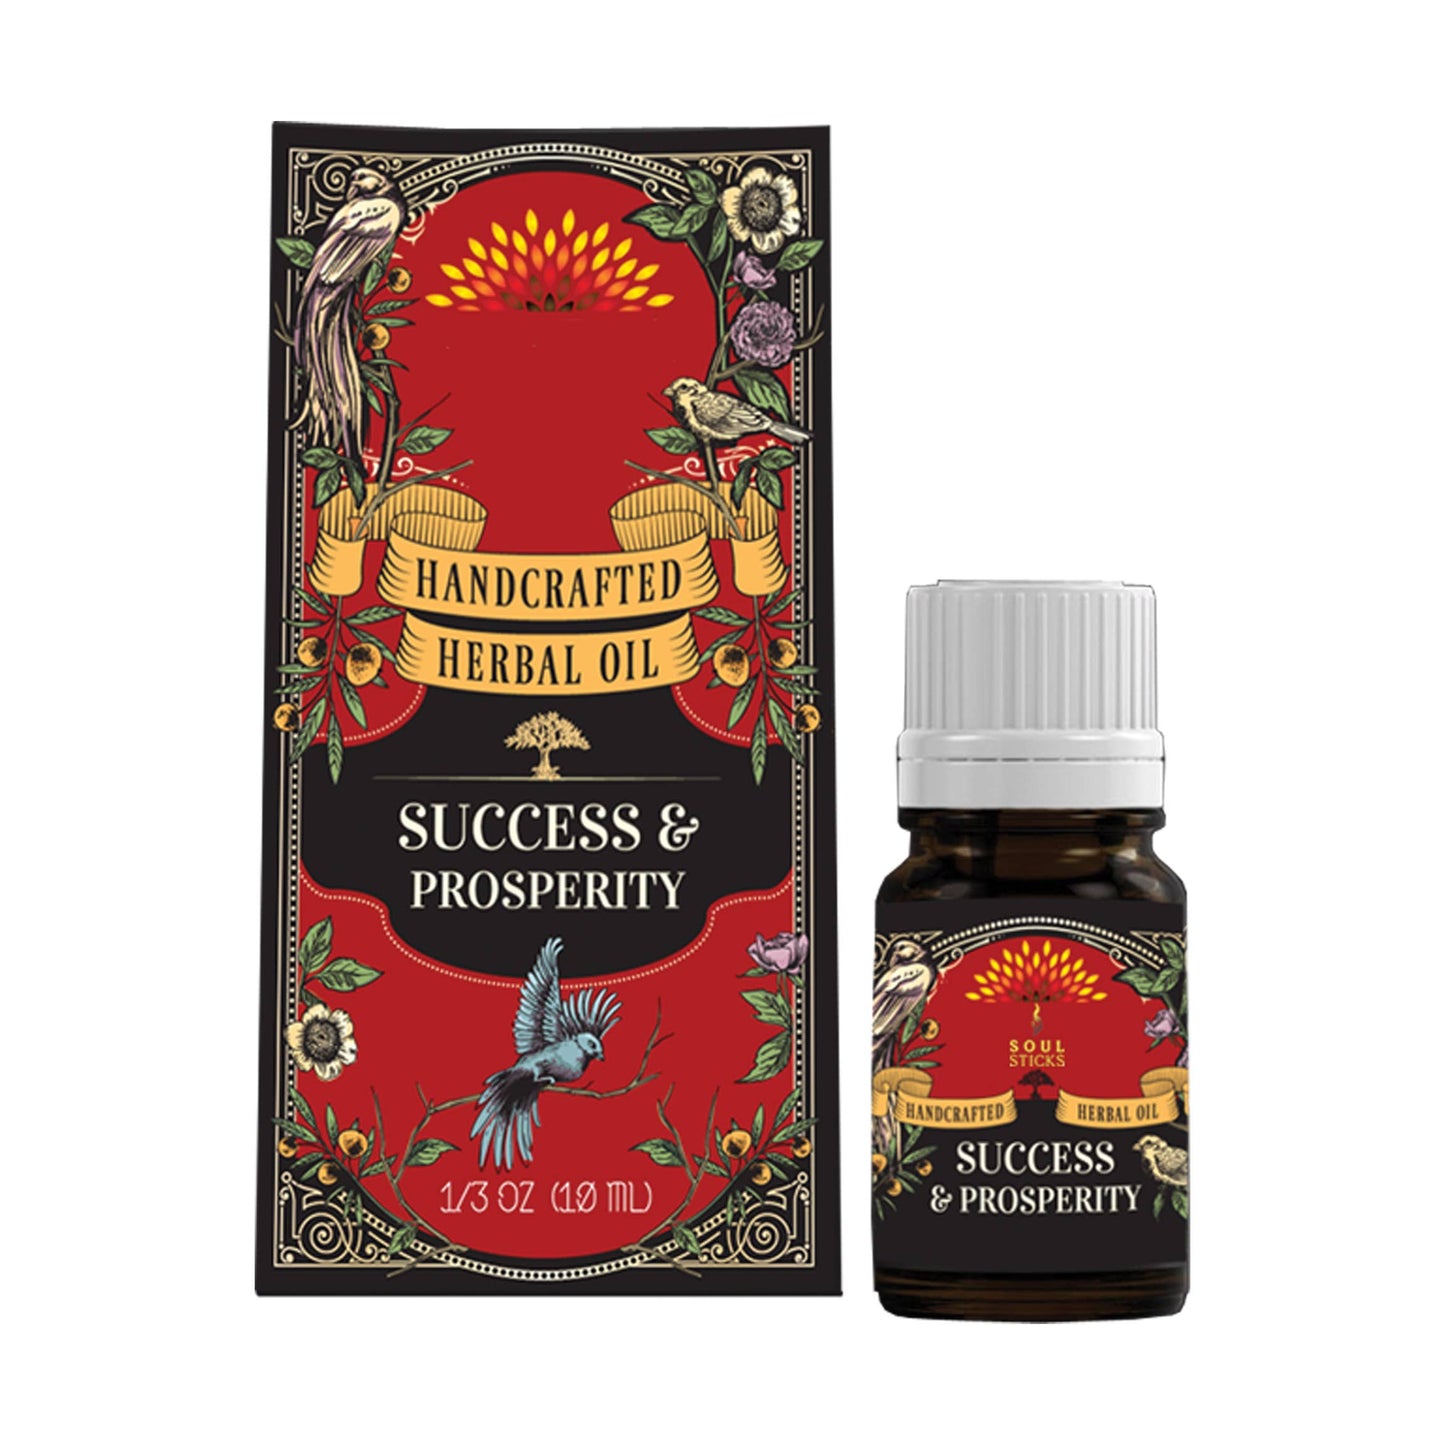 Success and Prosperity Herbal Oil for Anointing, Crafting, and Aromatherapy